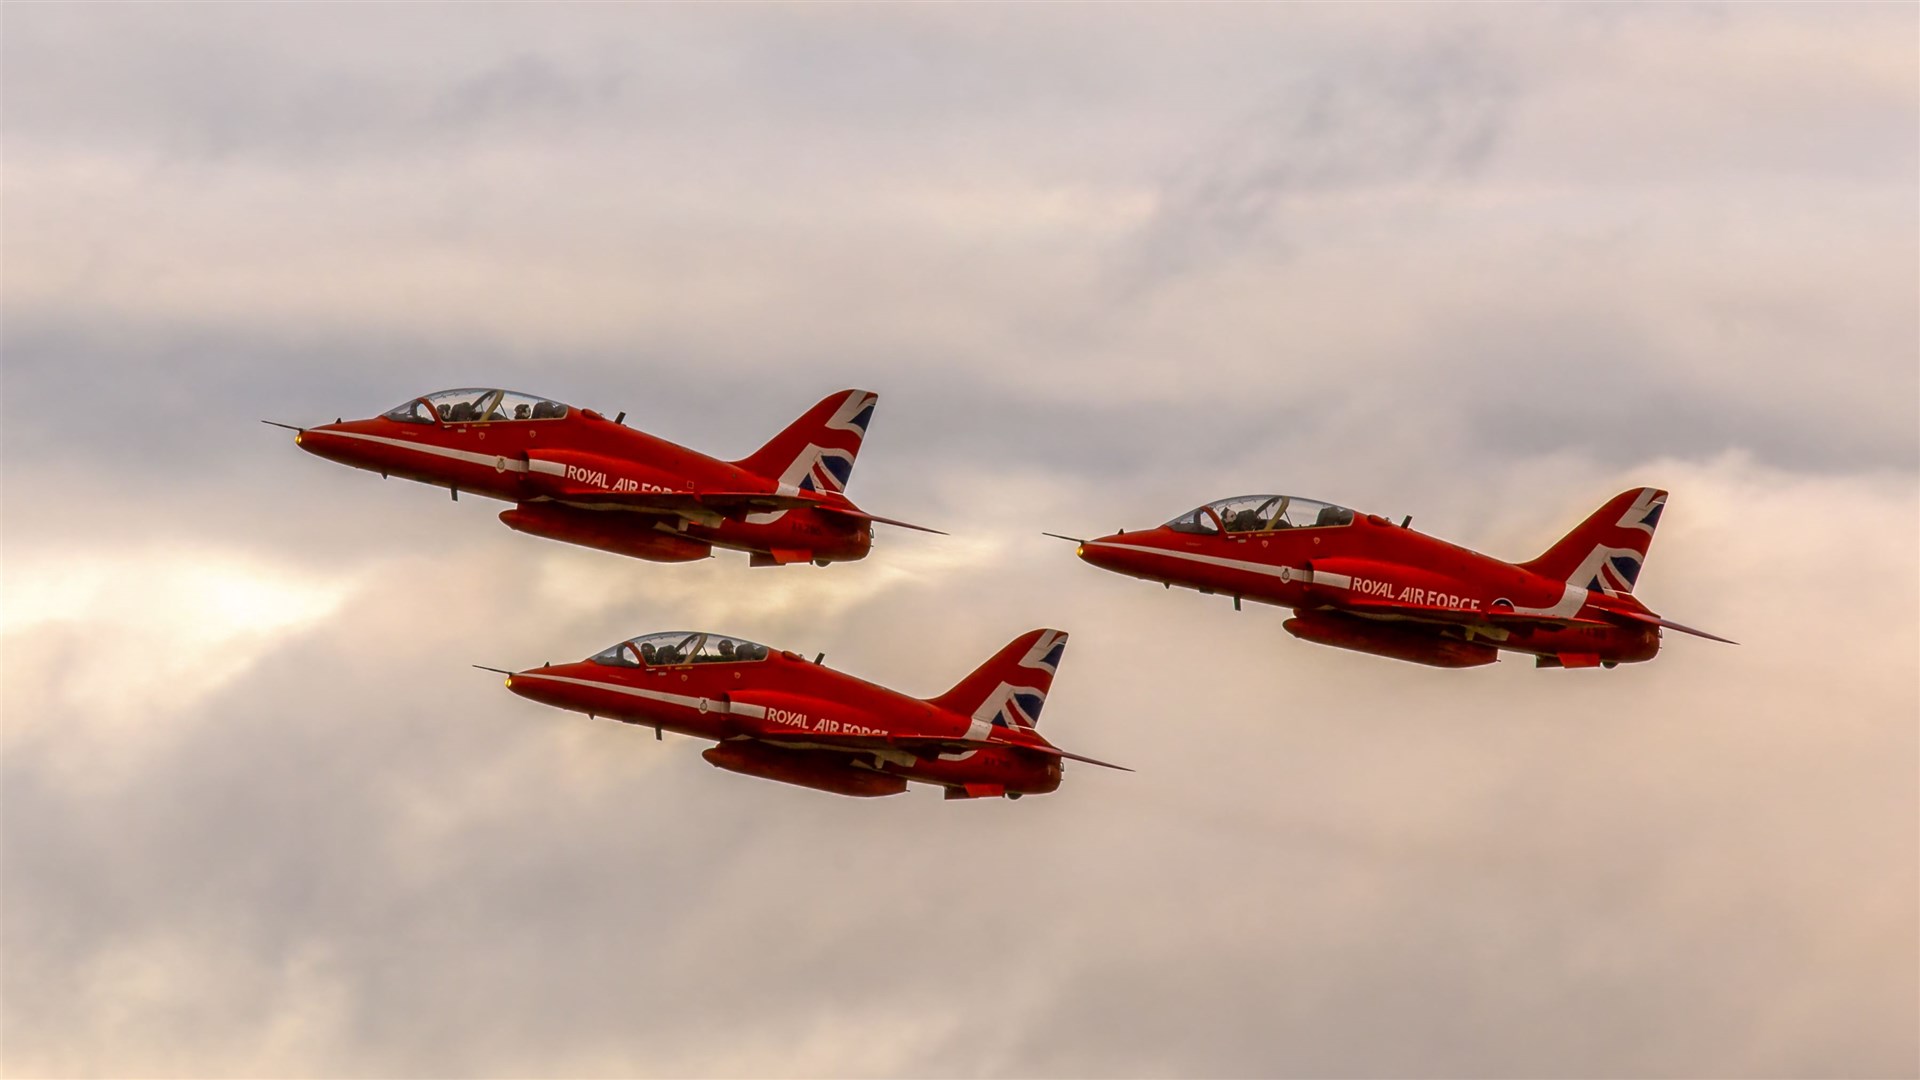 Reader Alan Tough submitted this photo of the Red Arrows in the sky.